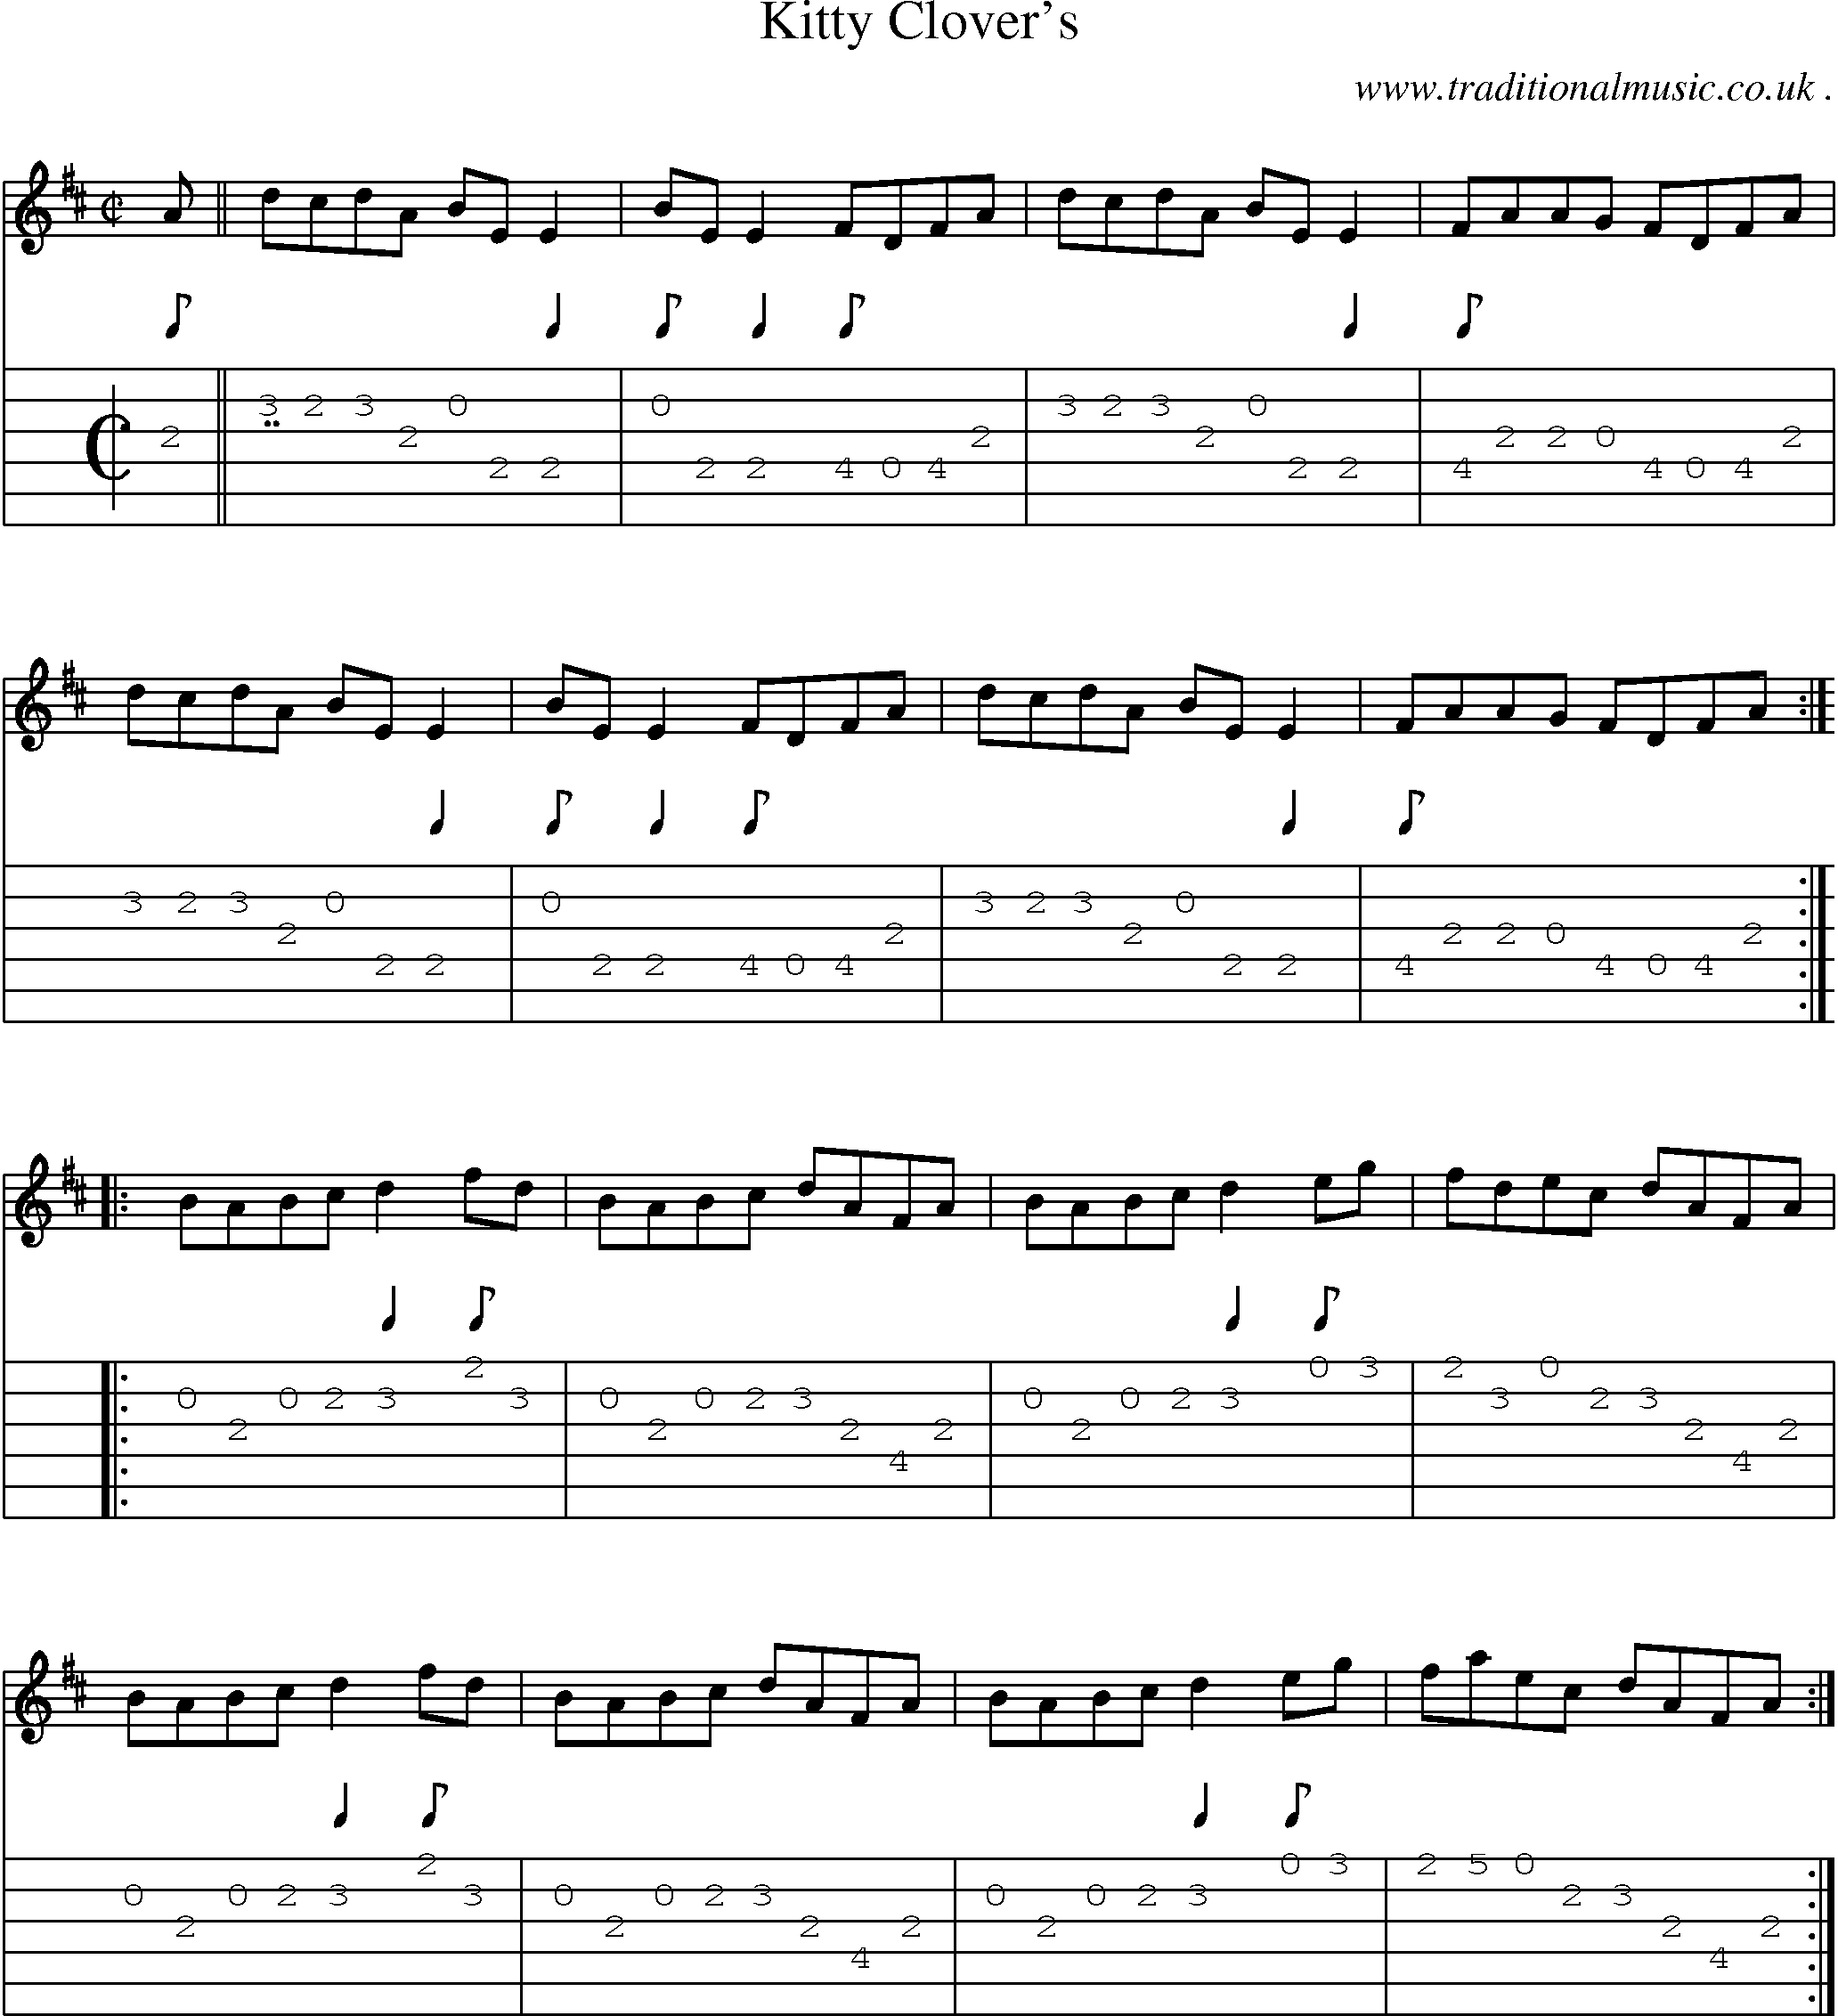 Sheet-Music and Guitar Tabs for Kitty Clovers